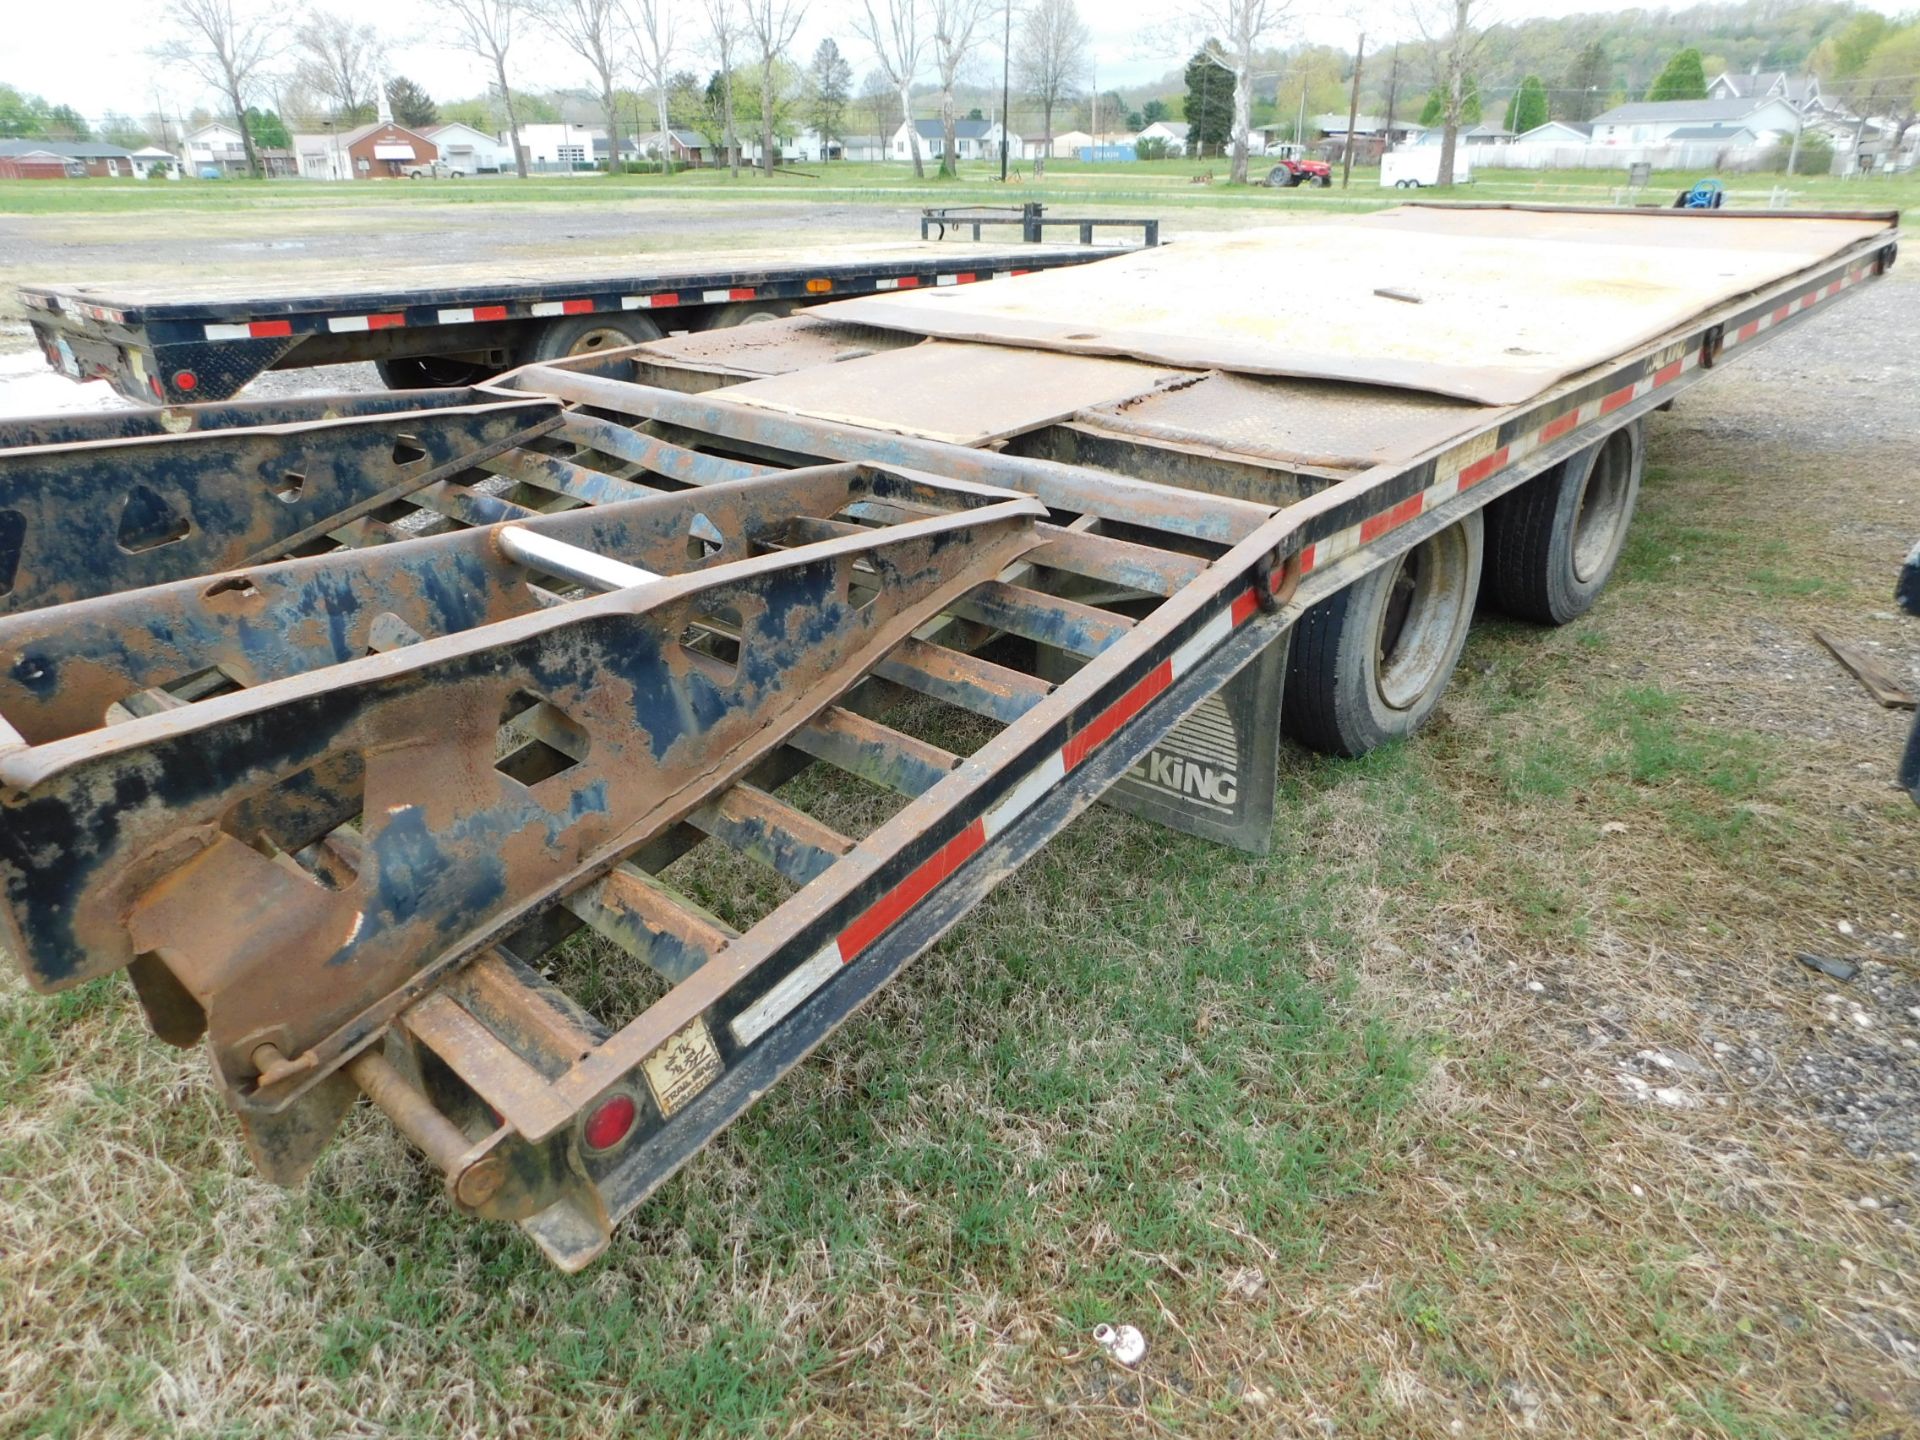 1998 Trail King Tandem Axle Trailer, VIN 1TKC02420WB043750, Dual Wheels, 24' Overall Length, 19' - Image 8 of 12